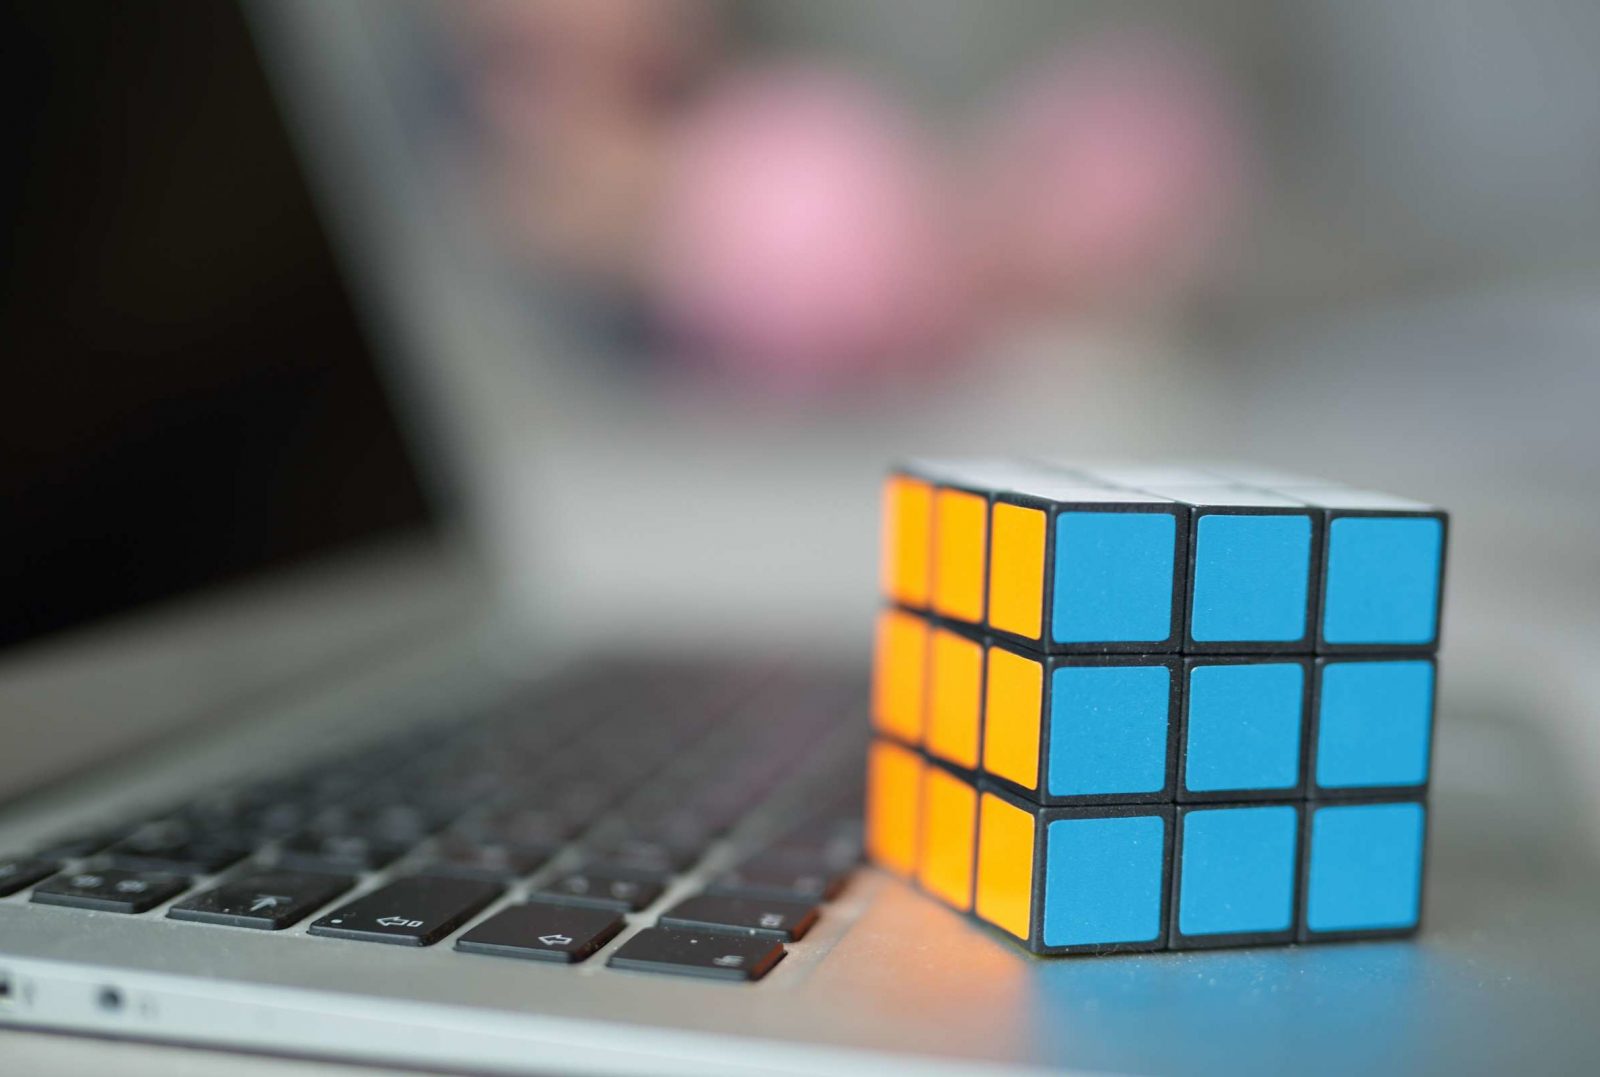 So You Think You’re Great at General Knowledge, Eh? Prove It With This Quiz Rubik's Cube